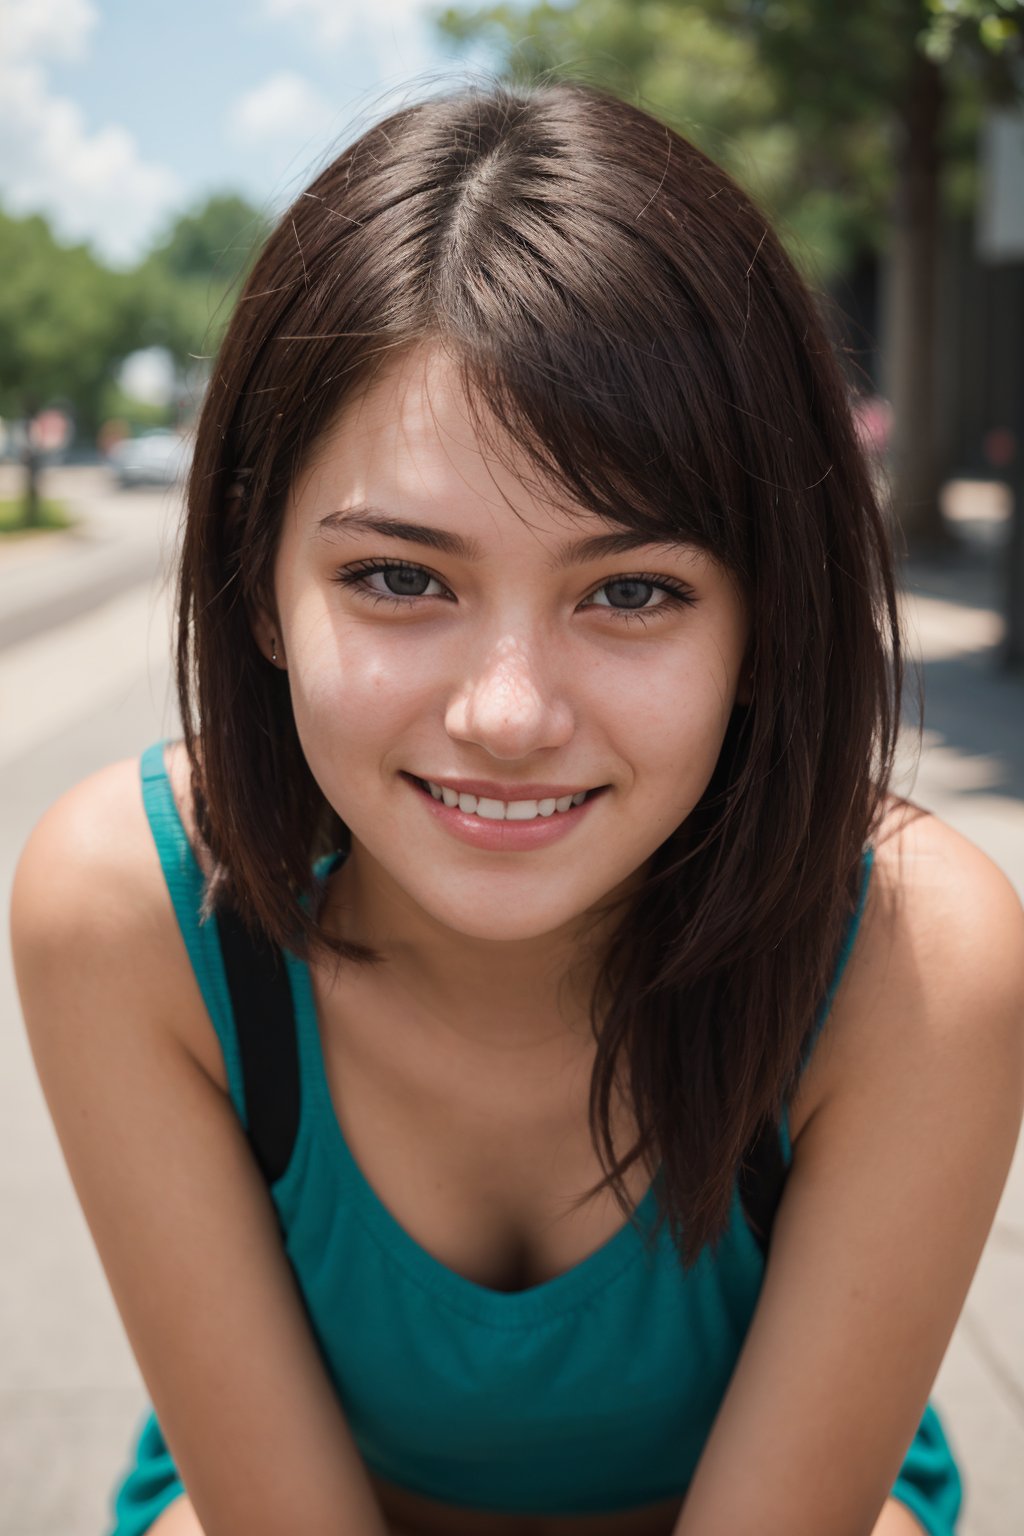 photo of a 18 year old girl, grin,evil grin, facing viewer,ray tracing,detail shadow,shot on Fujifilm X-T4,85mm f1.2,depth of field, realistic,